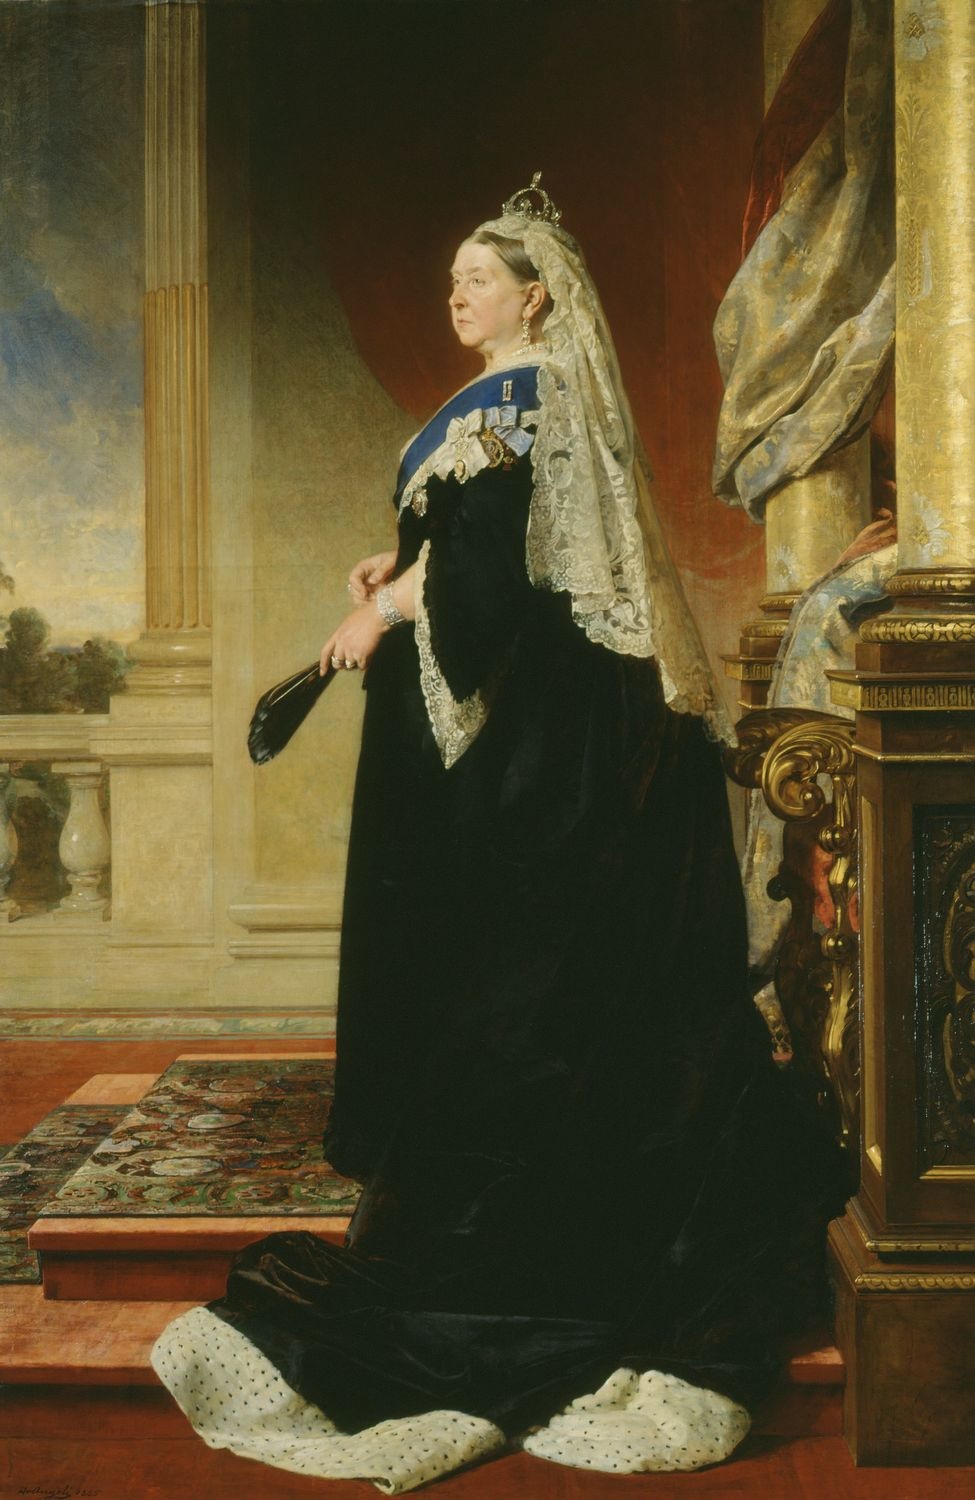 Artist portrait of Queen Victoria (r.1837-1901). She is shown wearing a crown, and in a long, regal dress.